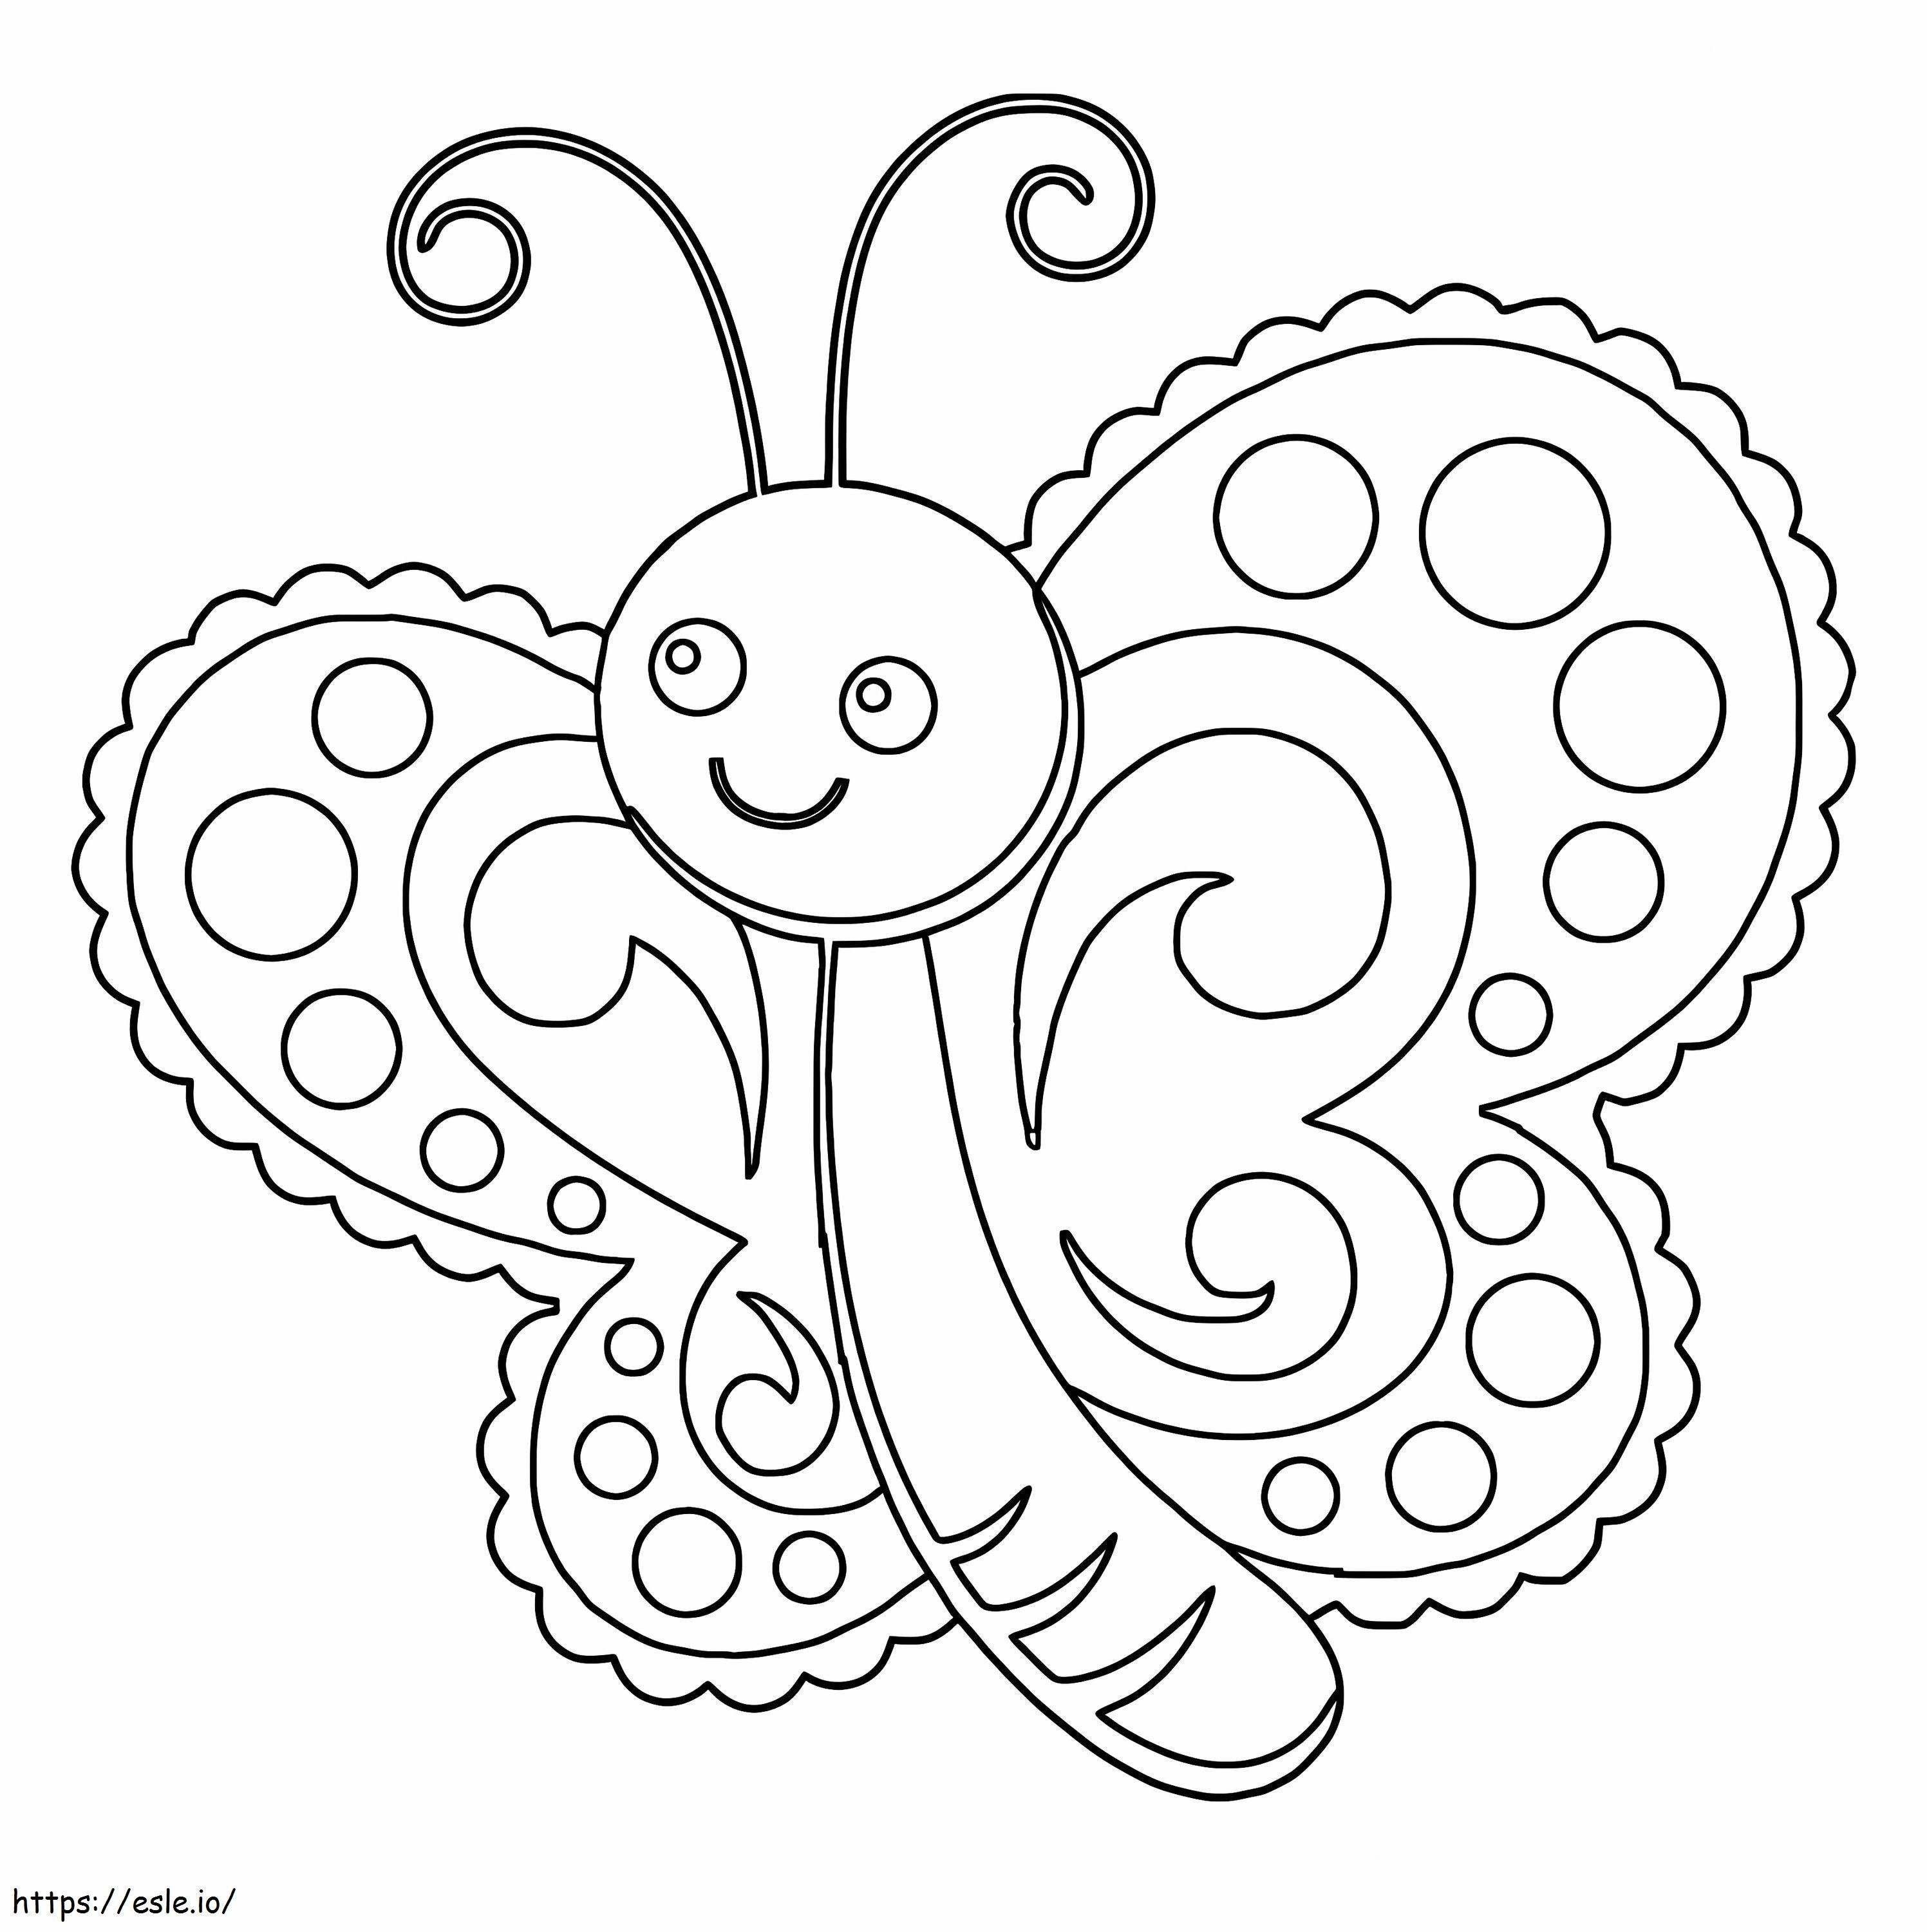 The Butterfly Smiles coloring page